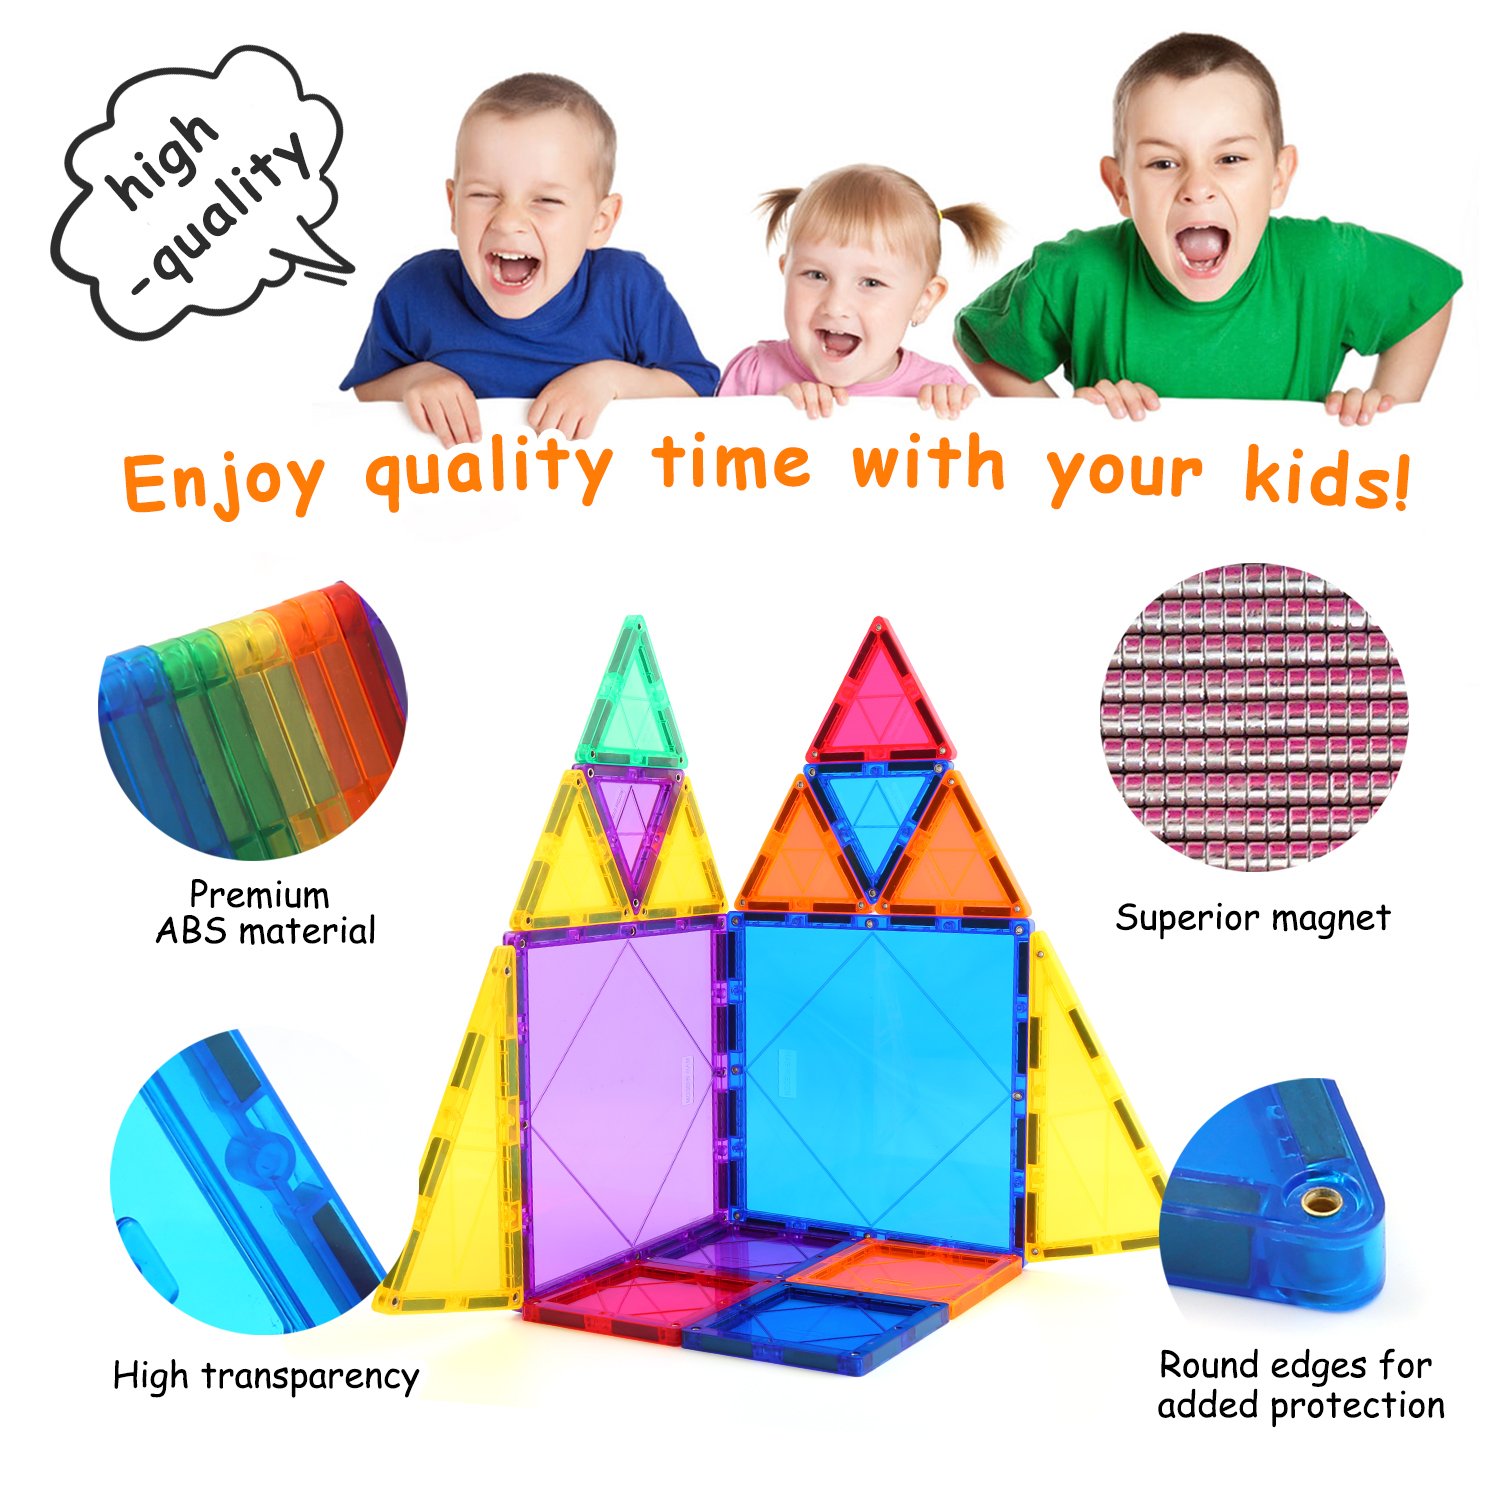 Children Hub 60pcs Magnetic Tiles Set - 3D Magnet Building Blocks - Premium Quality Educational Toys for Your Kids - Upgraded Version with Strong Magnets - Creativity, Imagination, Inspiration